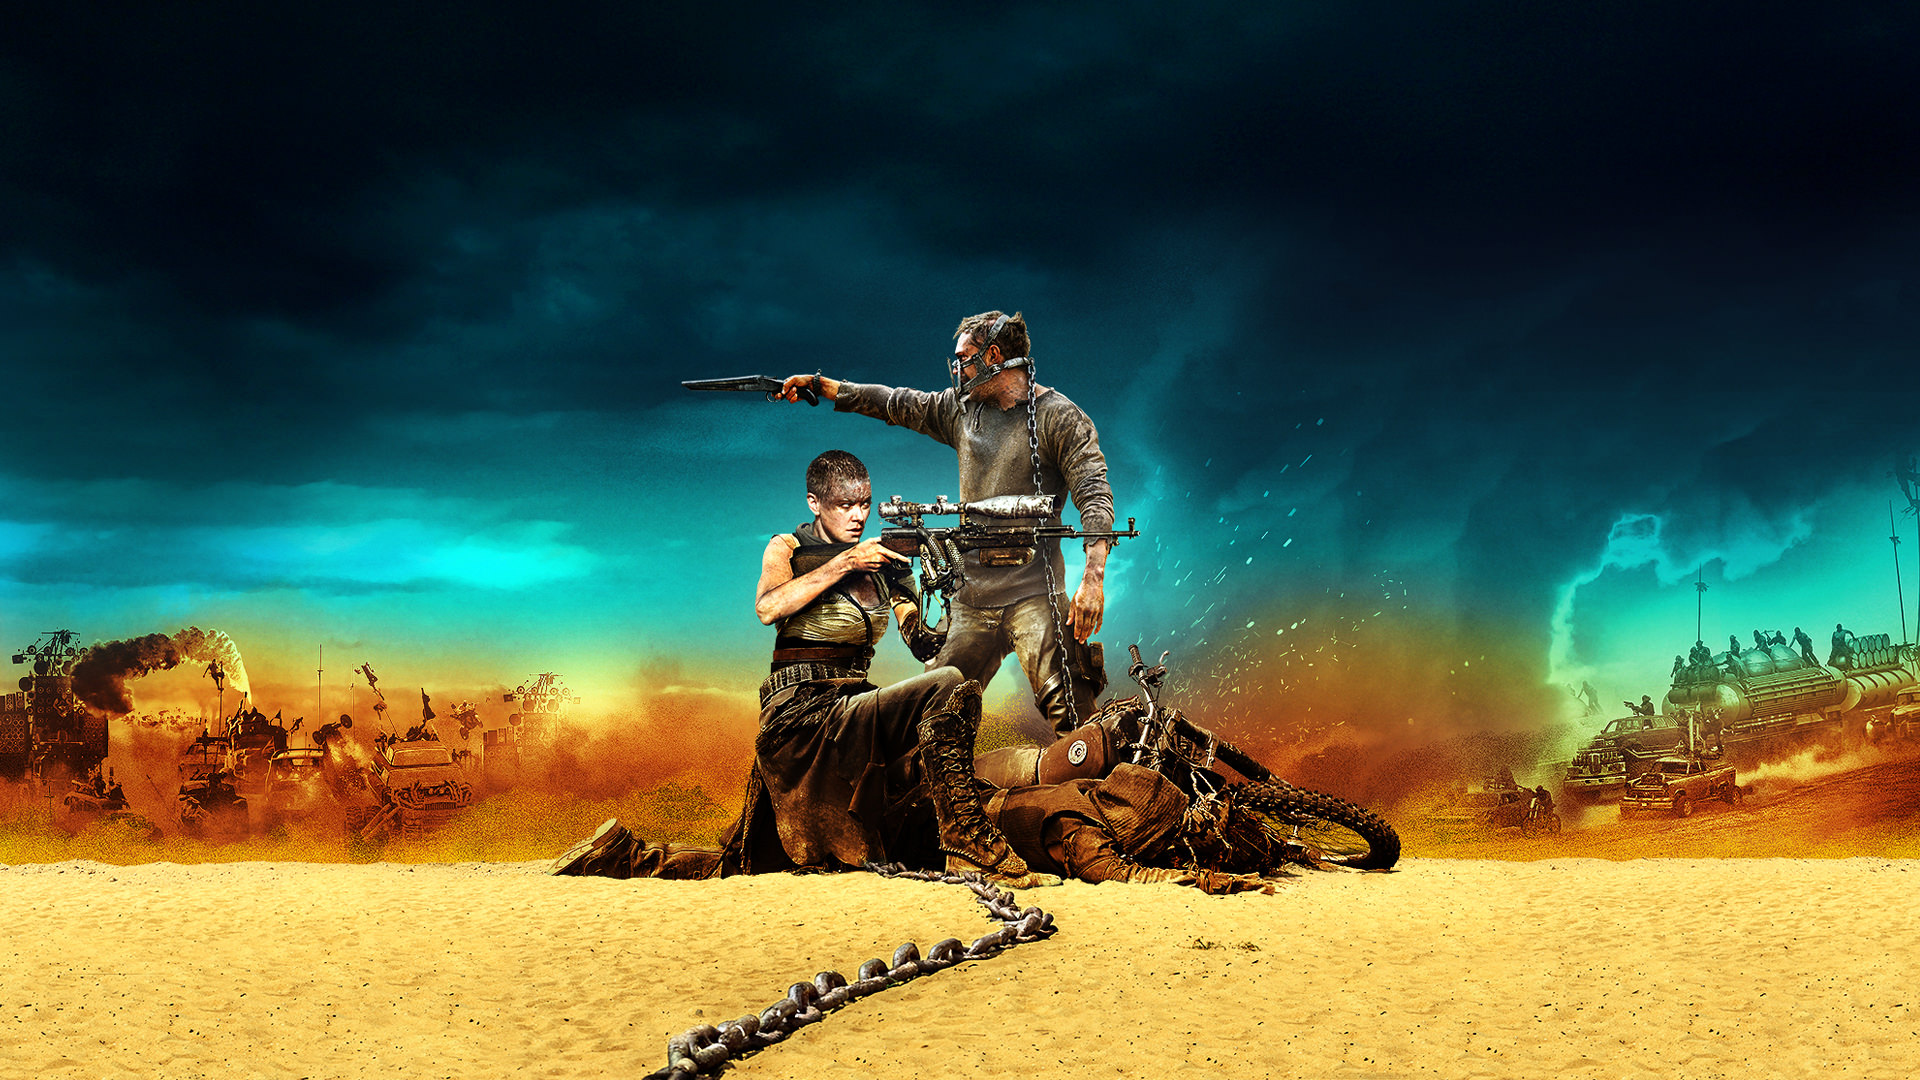 mad max fury road wallpaper,sky,photography,pc game,games